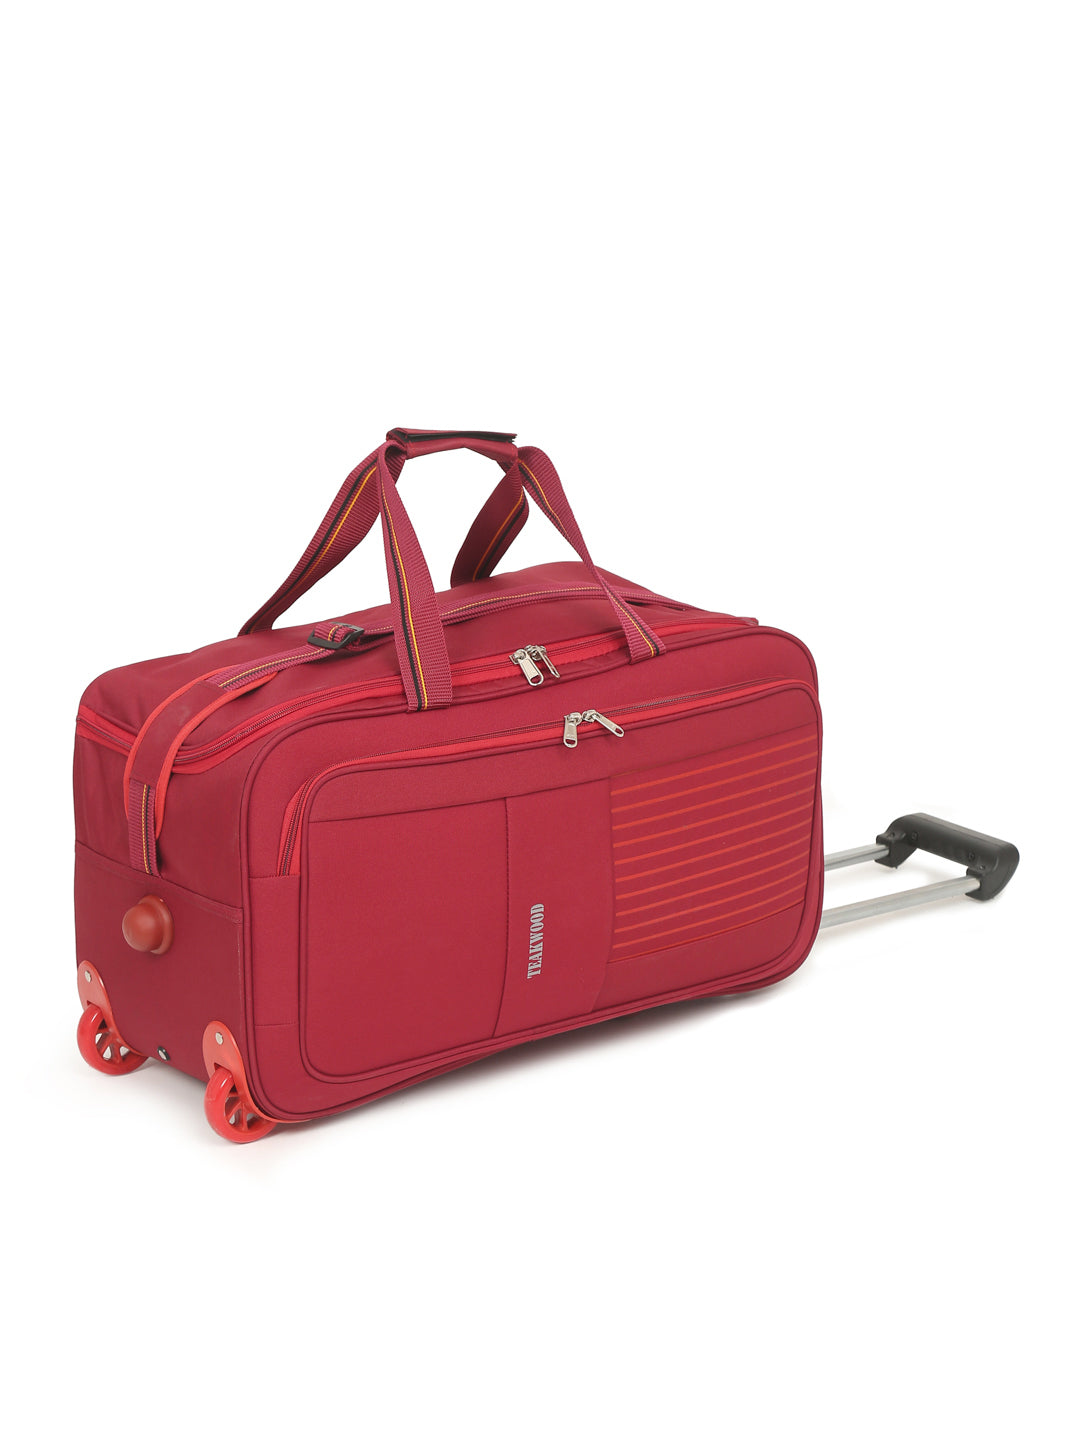 Luggage Bag With Wheels : Target